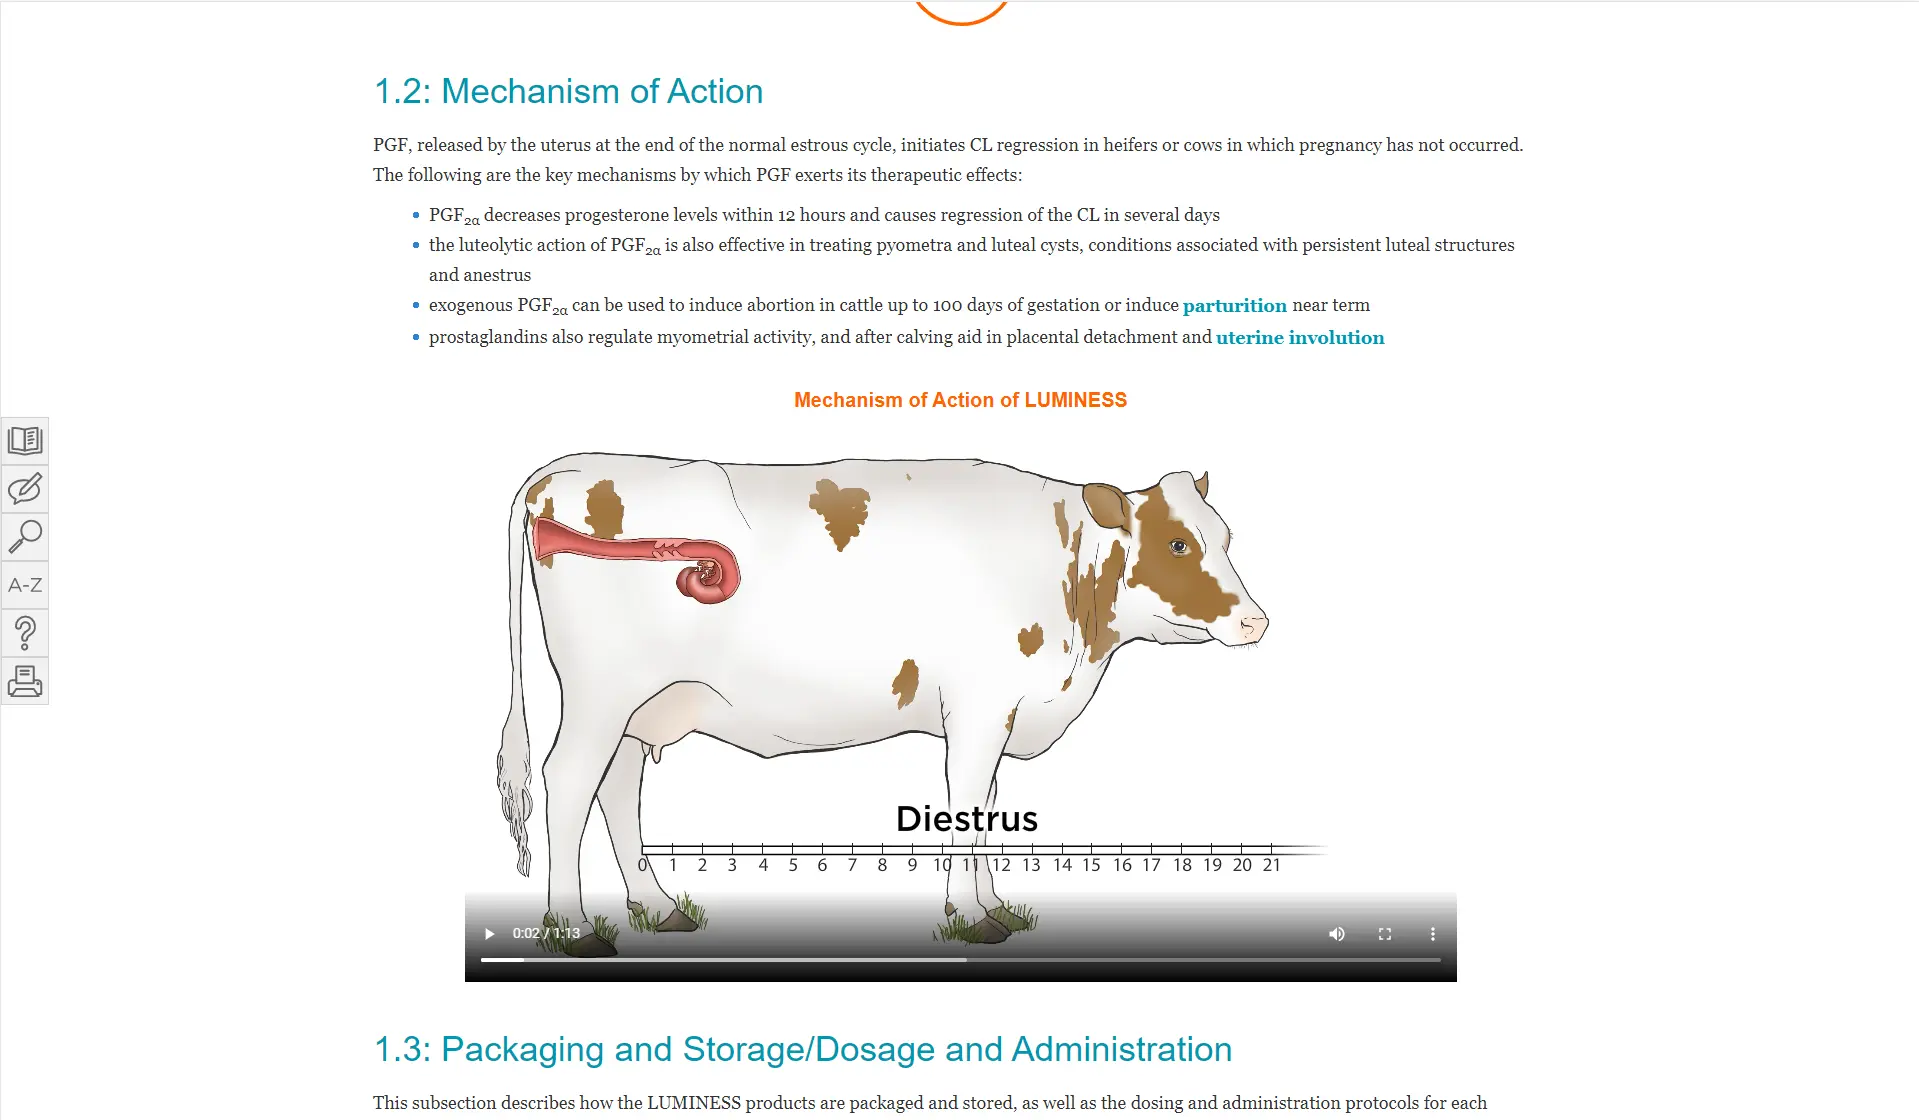 Beef & Dairy Cattle eLearning Example